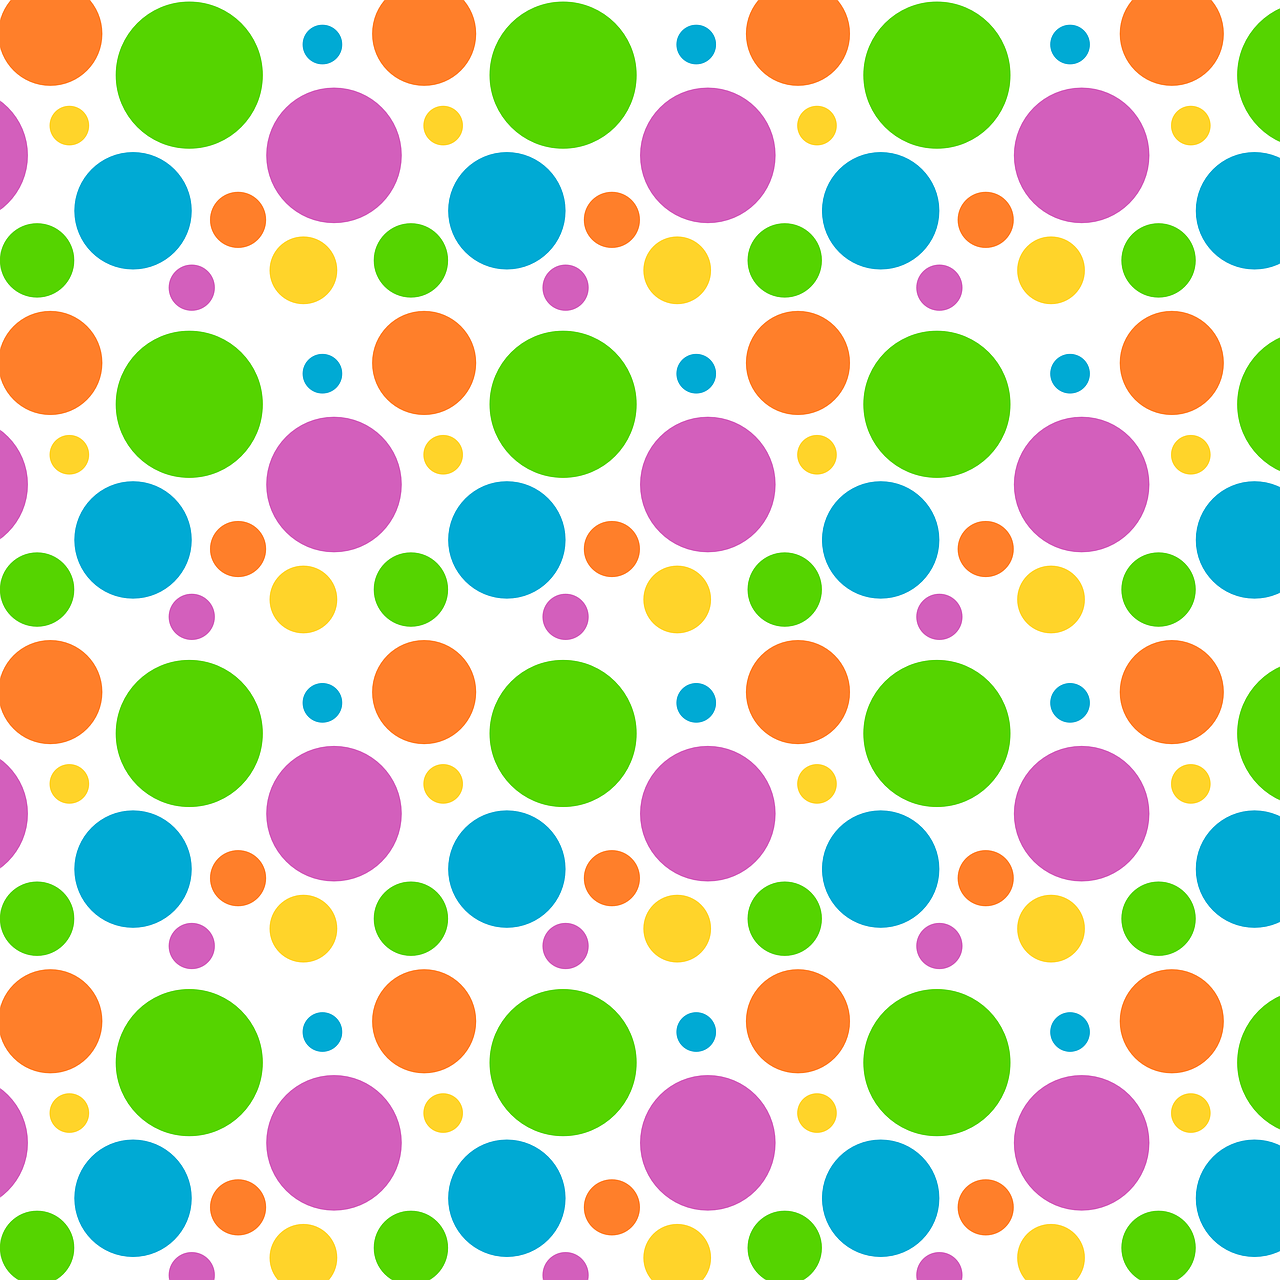 Bright light colors and polka dots what is your favorite color this